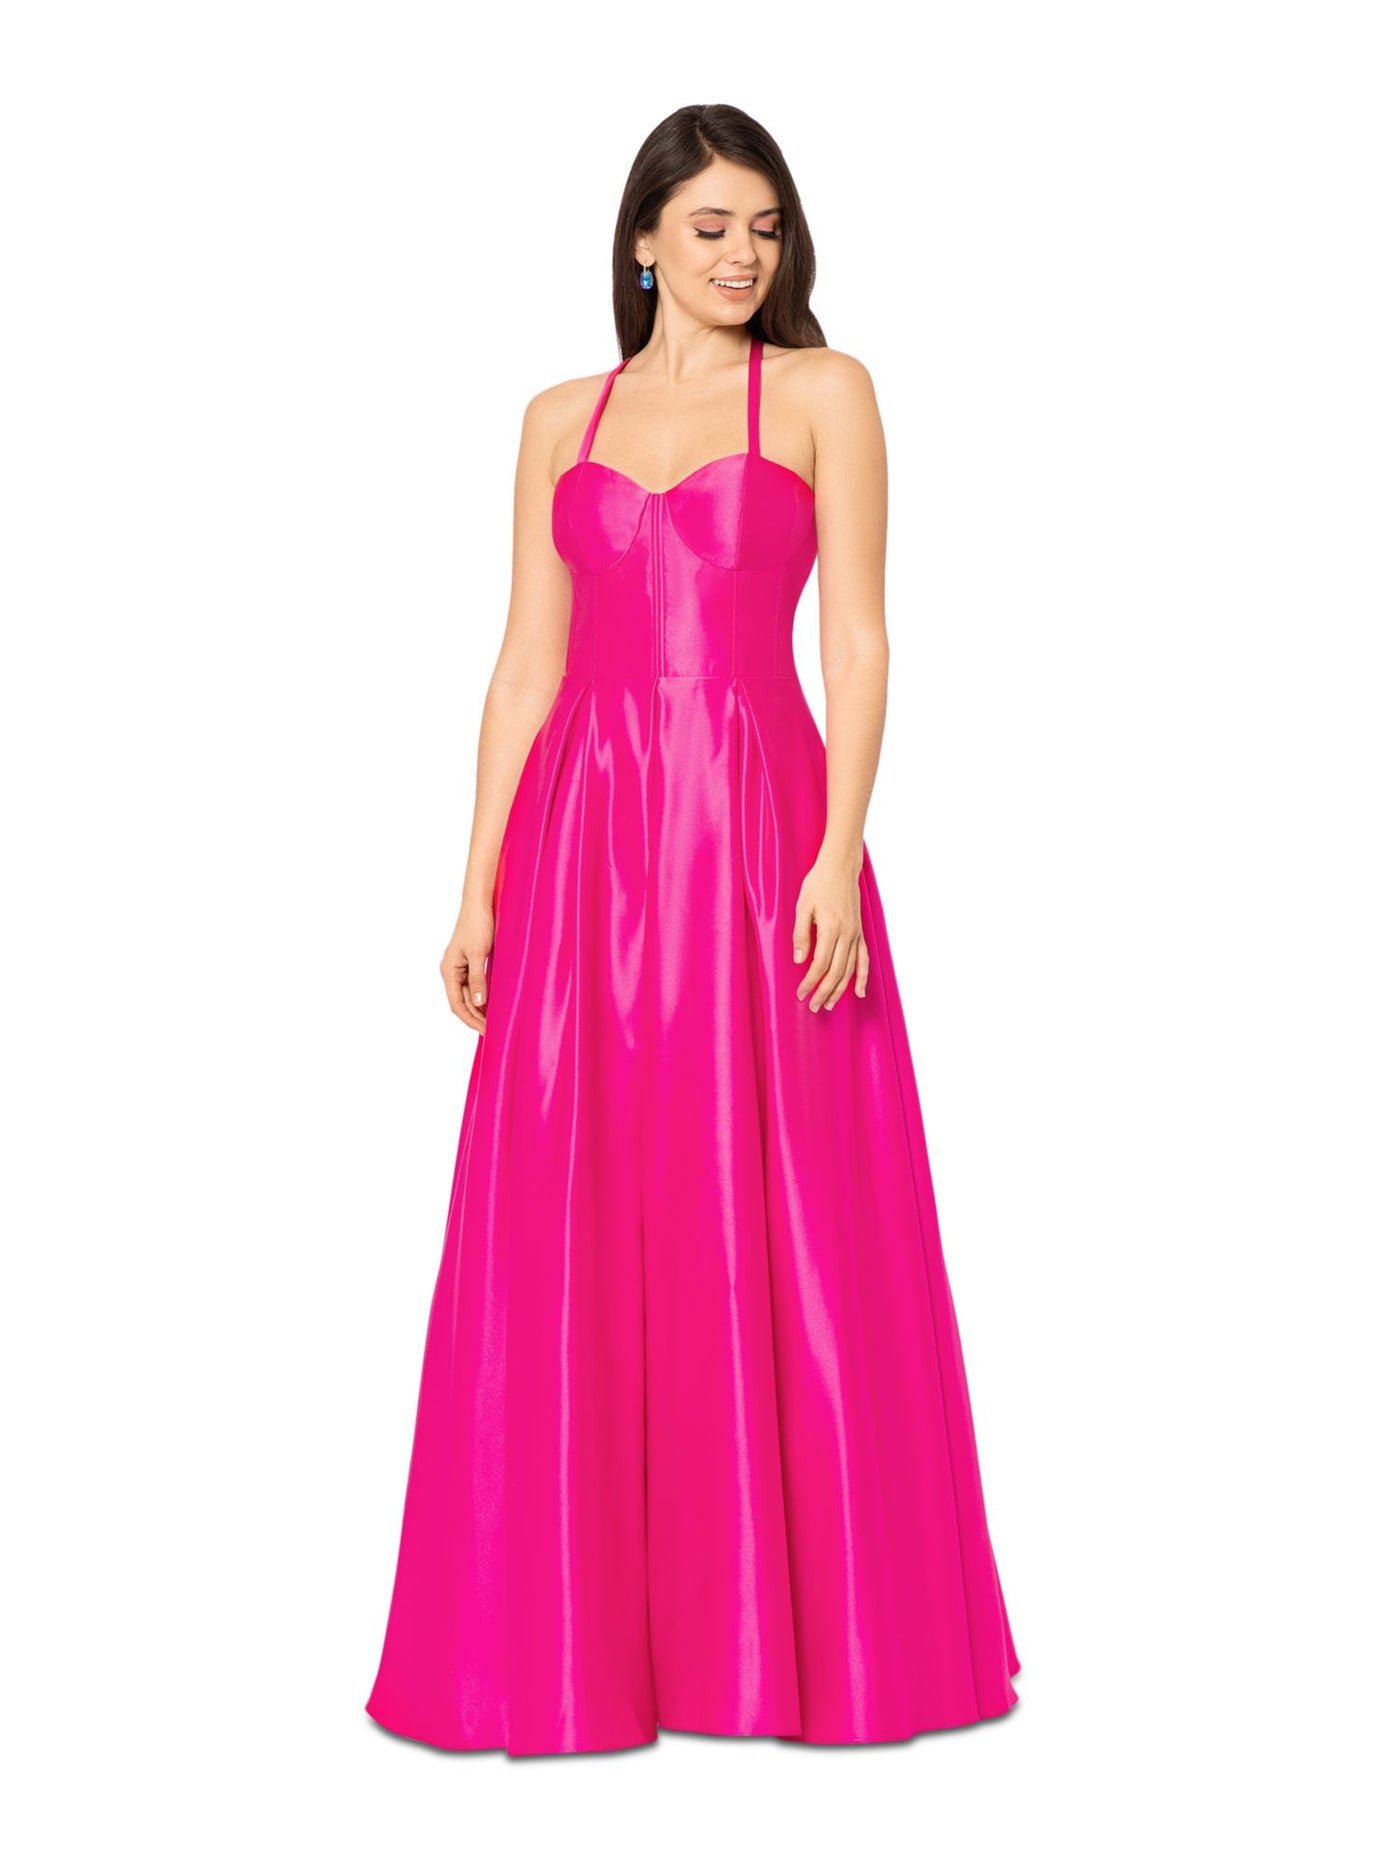 BLONDIE NITES Womens Pink Zippered Pocketed Lace-up Corset Bodice Lined Sleeveless Sweetheart Neckline Full-Length Formal Gown Dress Juniors 15